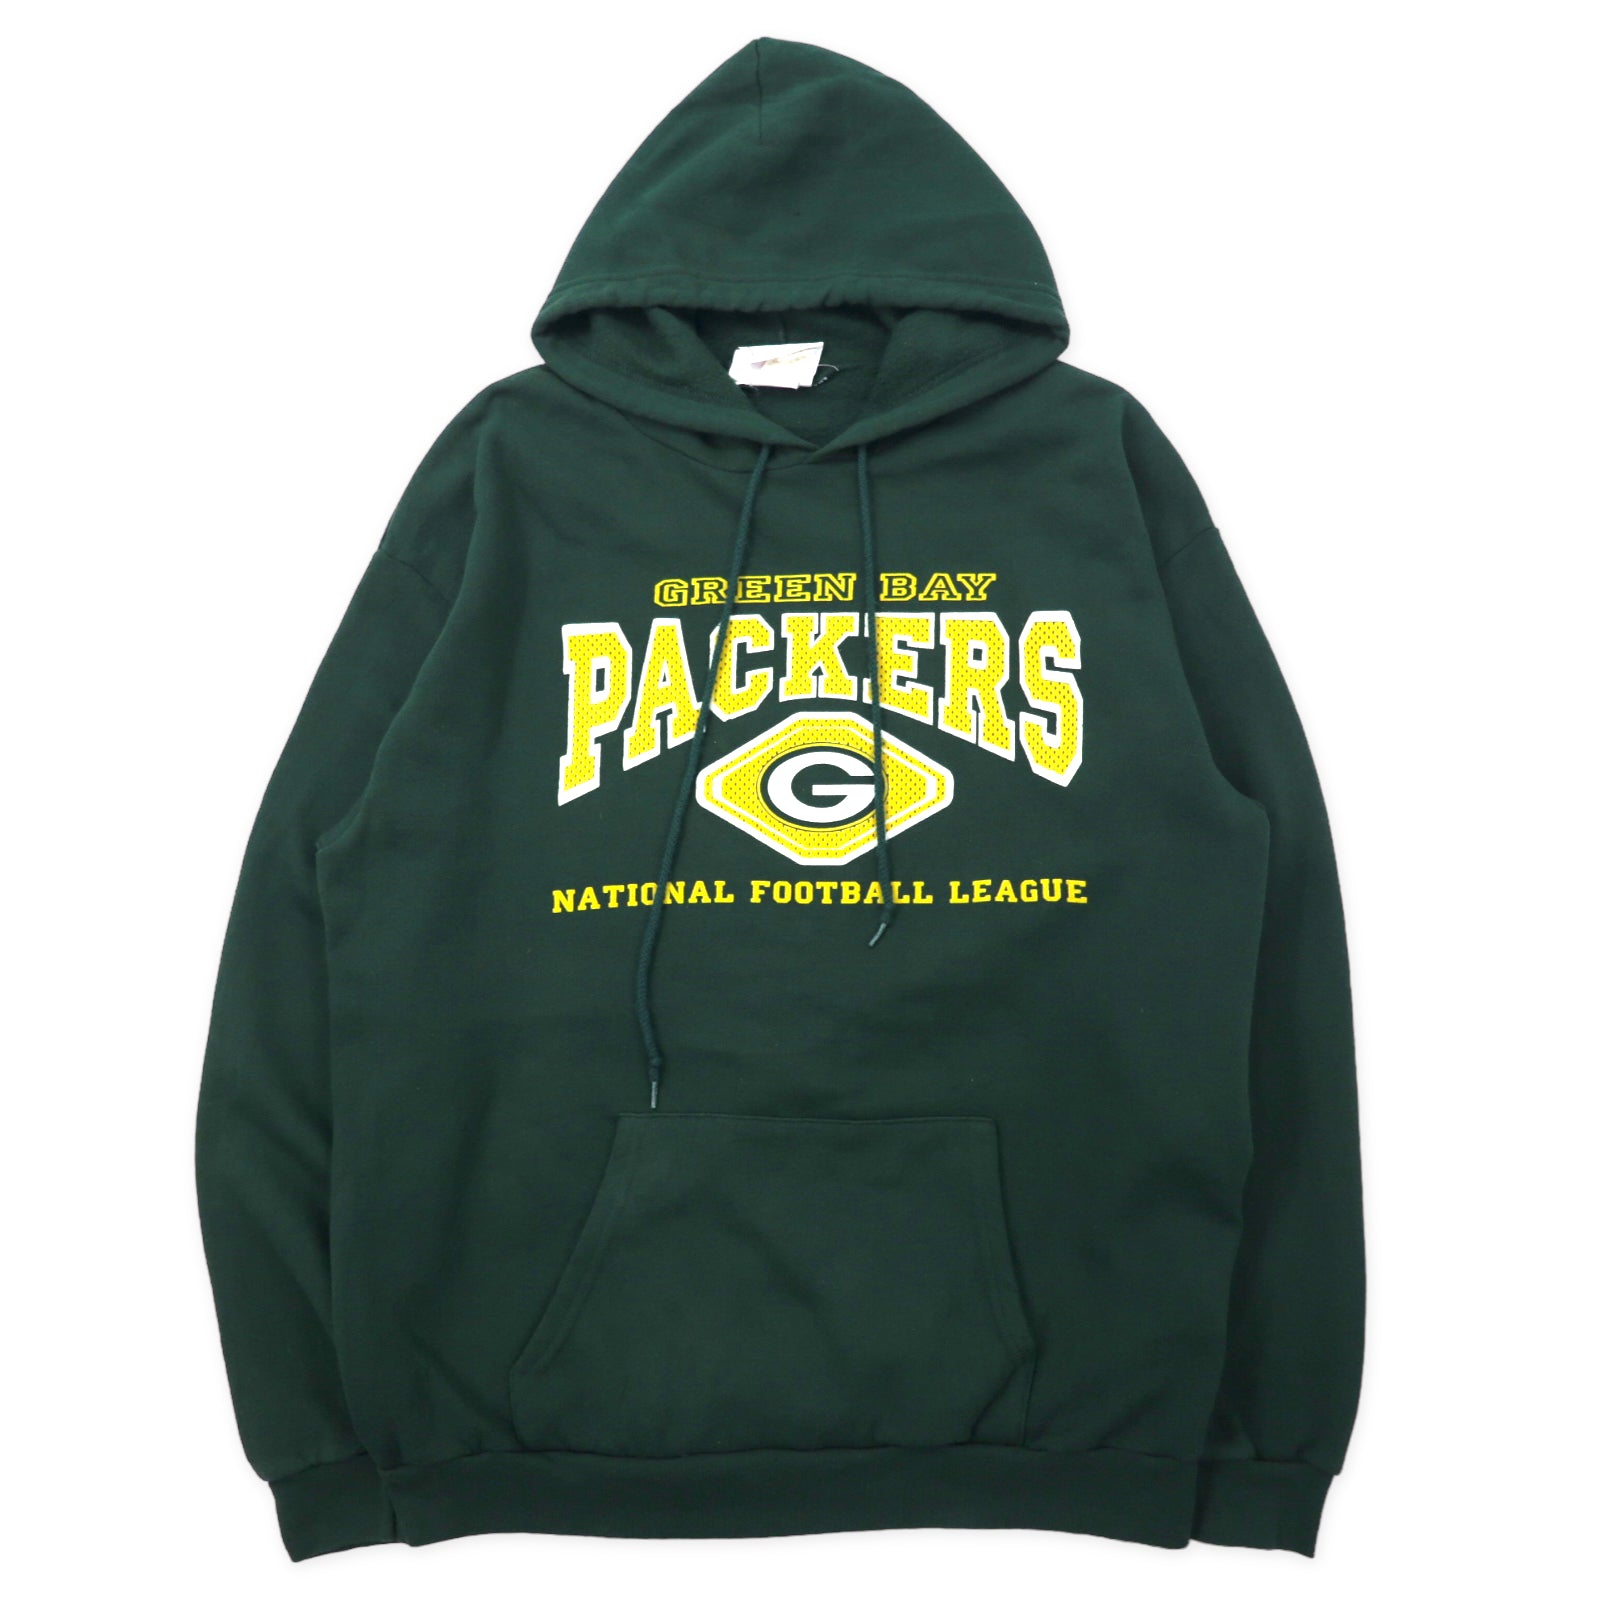 NFL GREEN BAY PACKERS Football Print HOODIE L Green Cotton BRUSHED